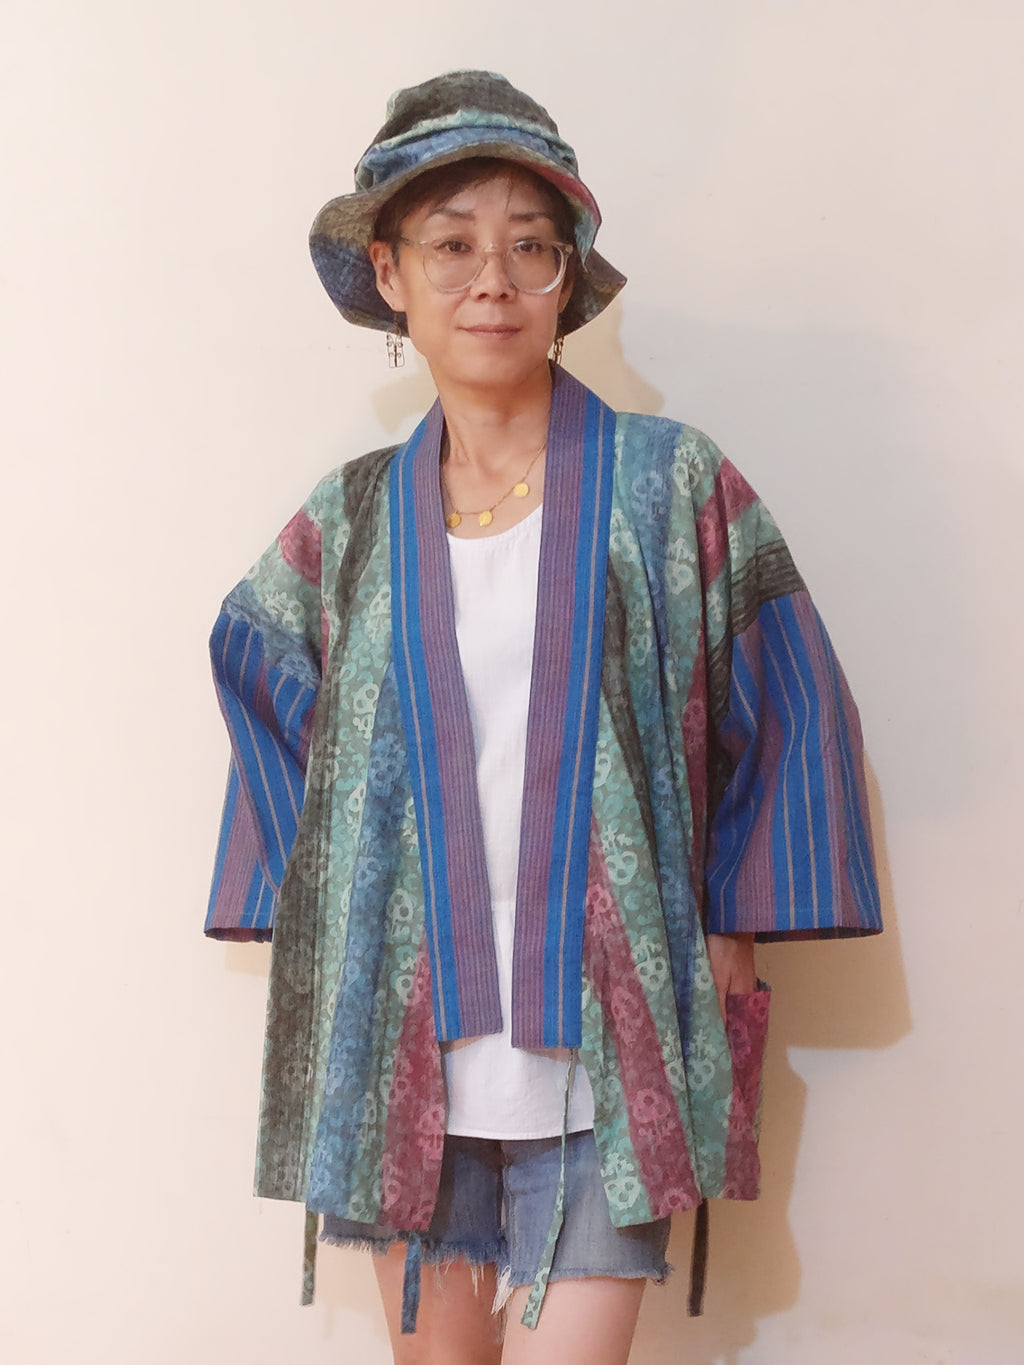 Kimono (Jinbei) short jacket from Japan with Indian cotton! Very comfy, very cool, chic and unique. Brush stripe (green) cute print plus handloom cotton for the collar and the sleeves. Shop online!